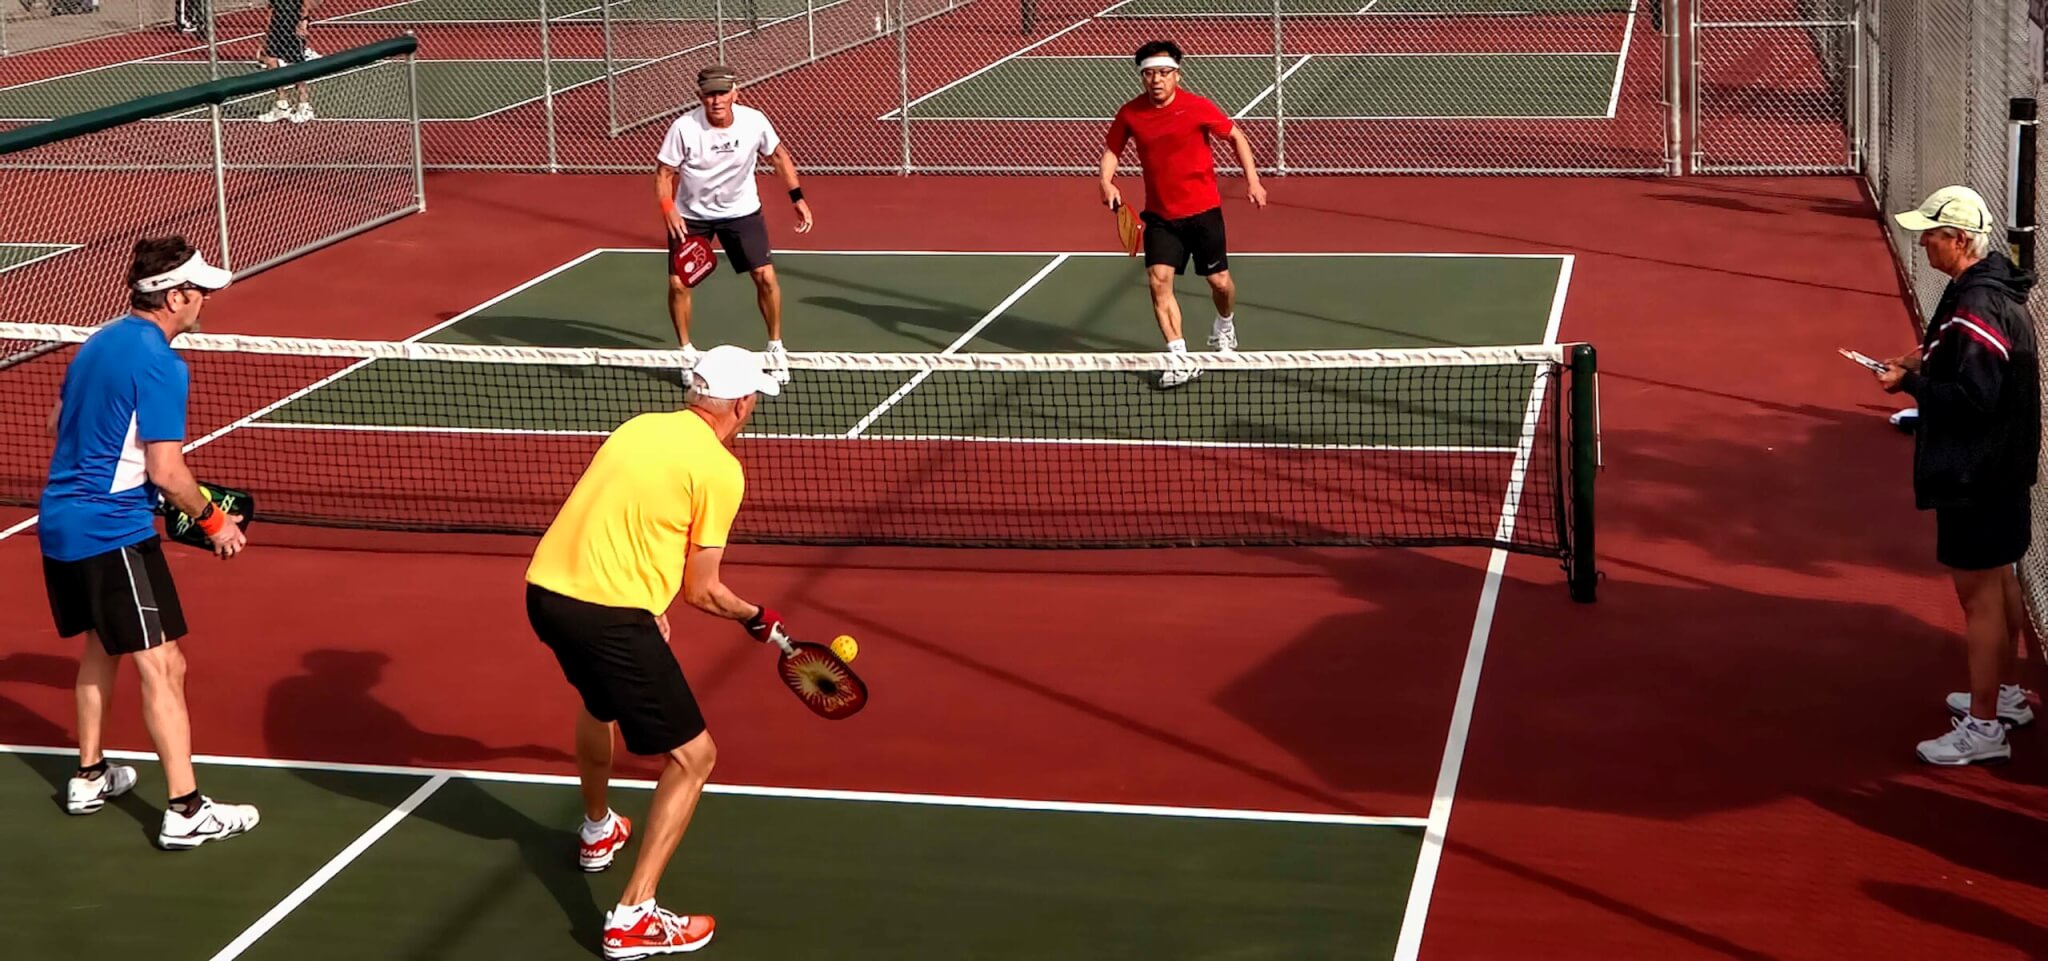 4 players in a pickleball game